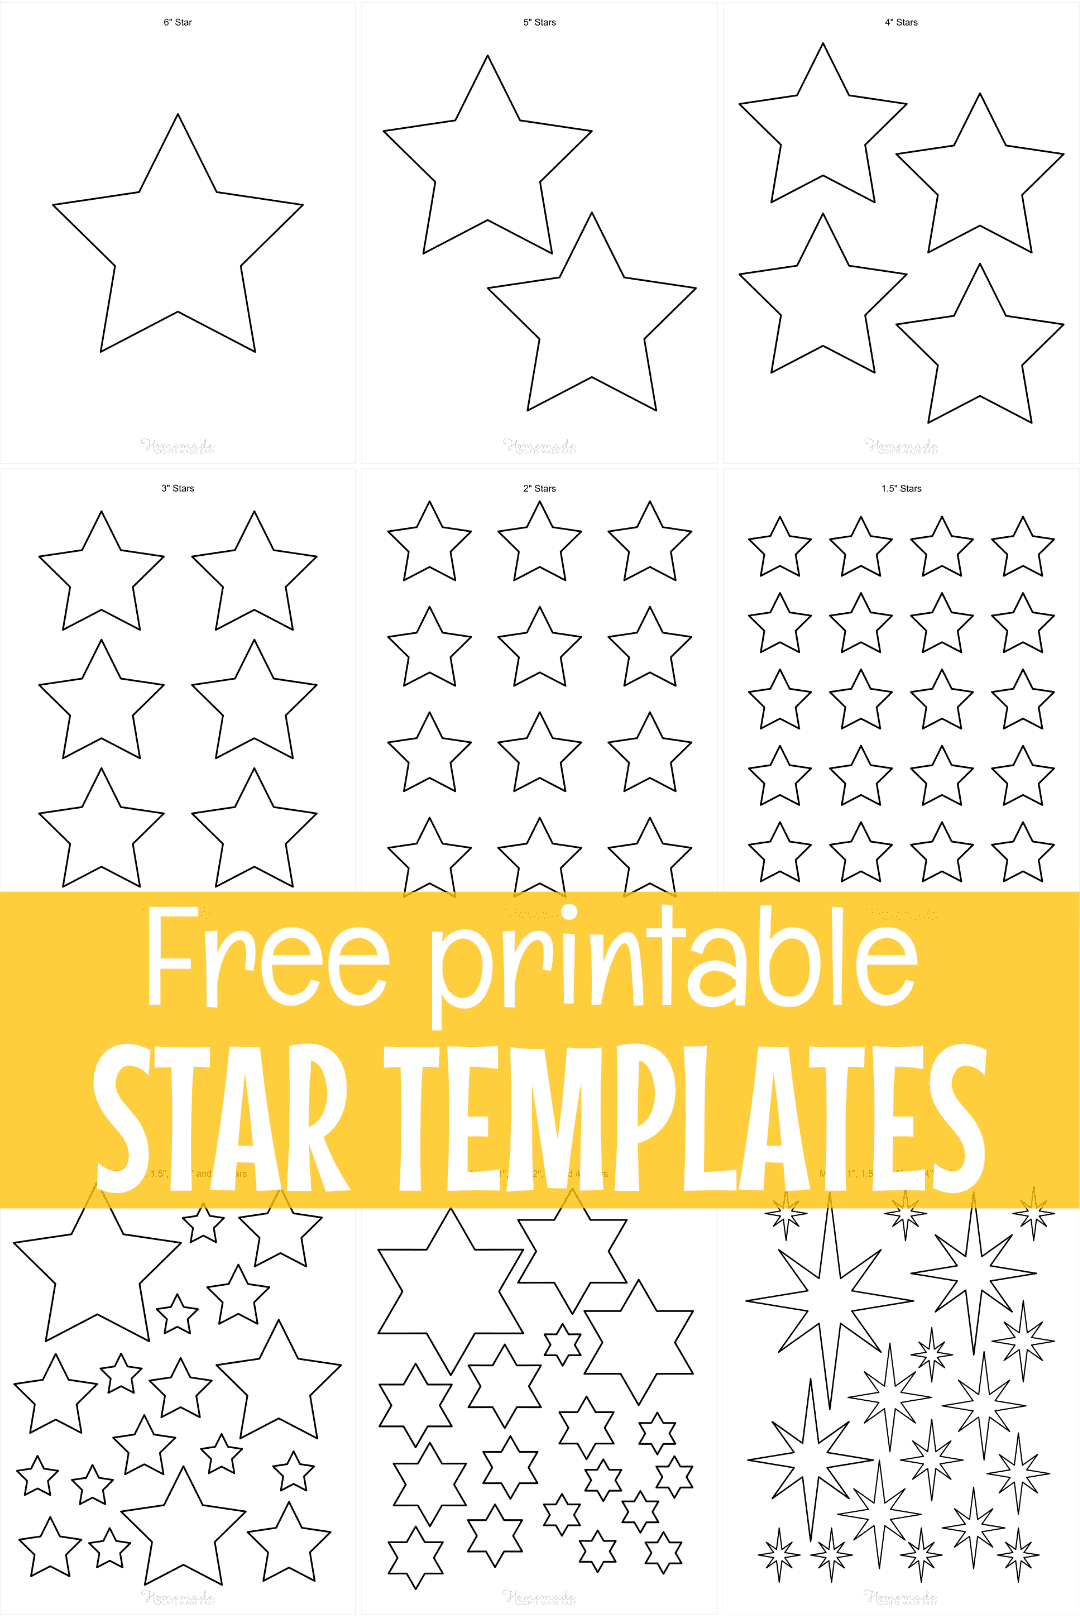 free printable star templates outlines all sizes large small 8 inch to 1 inch